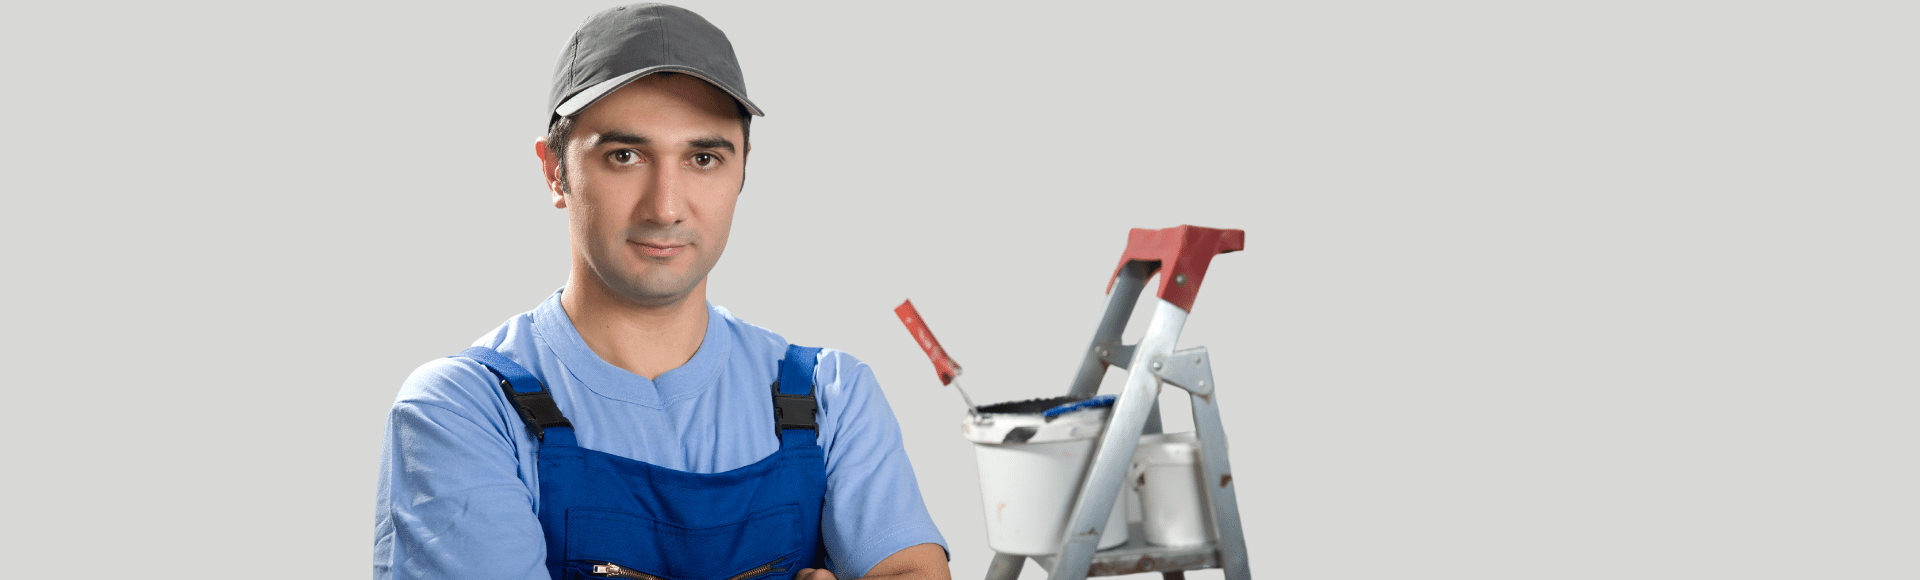 Professional painter ready to start work